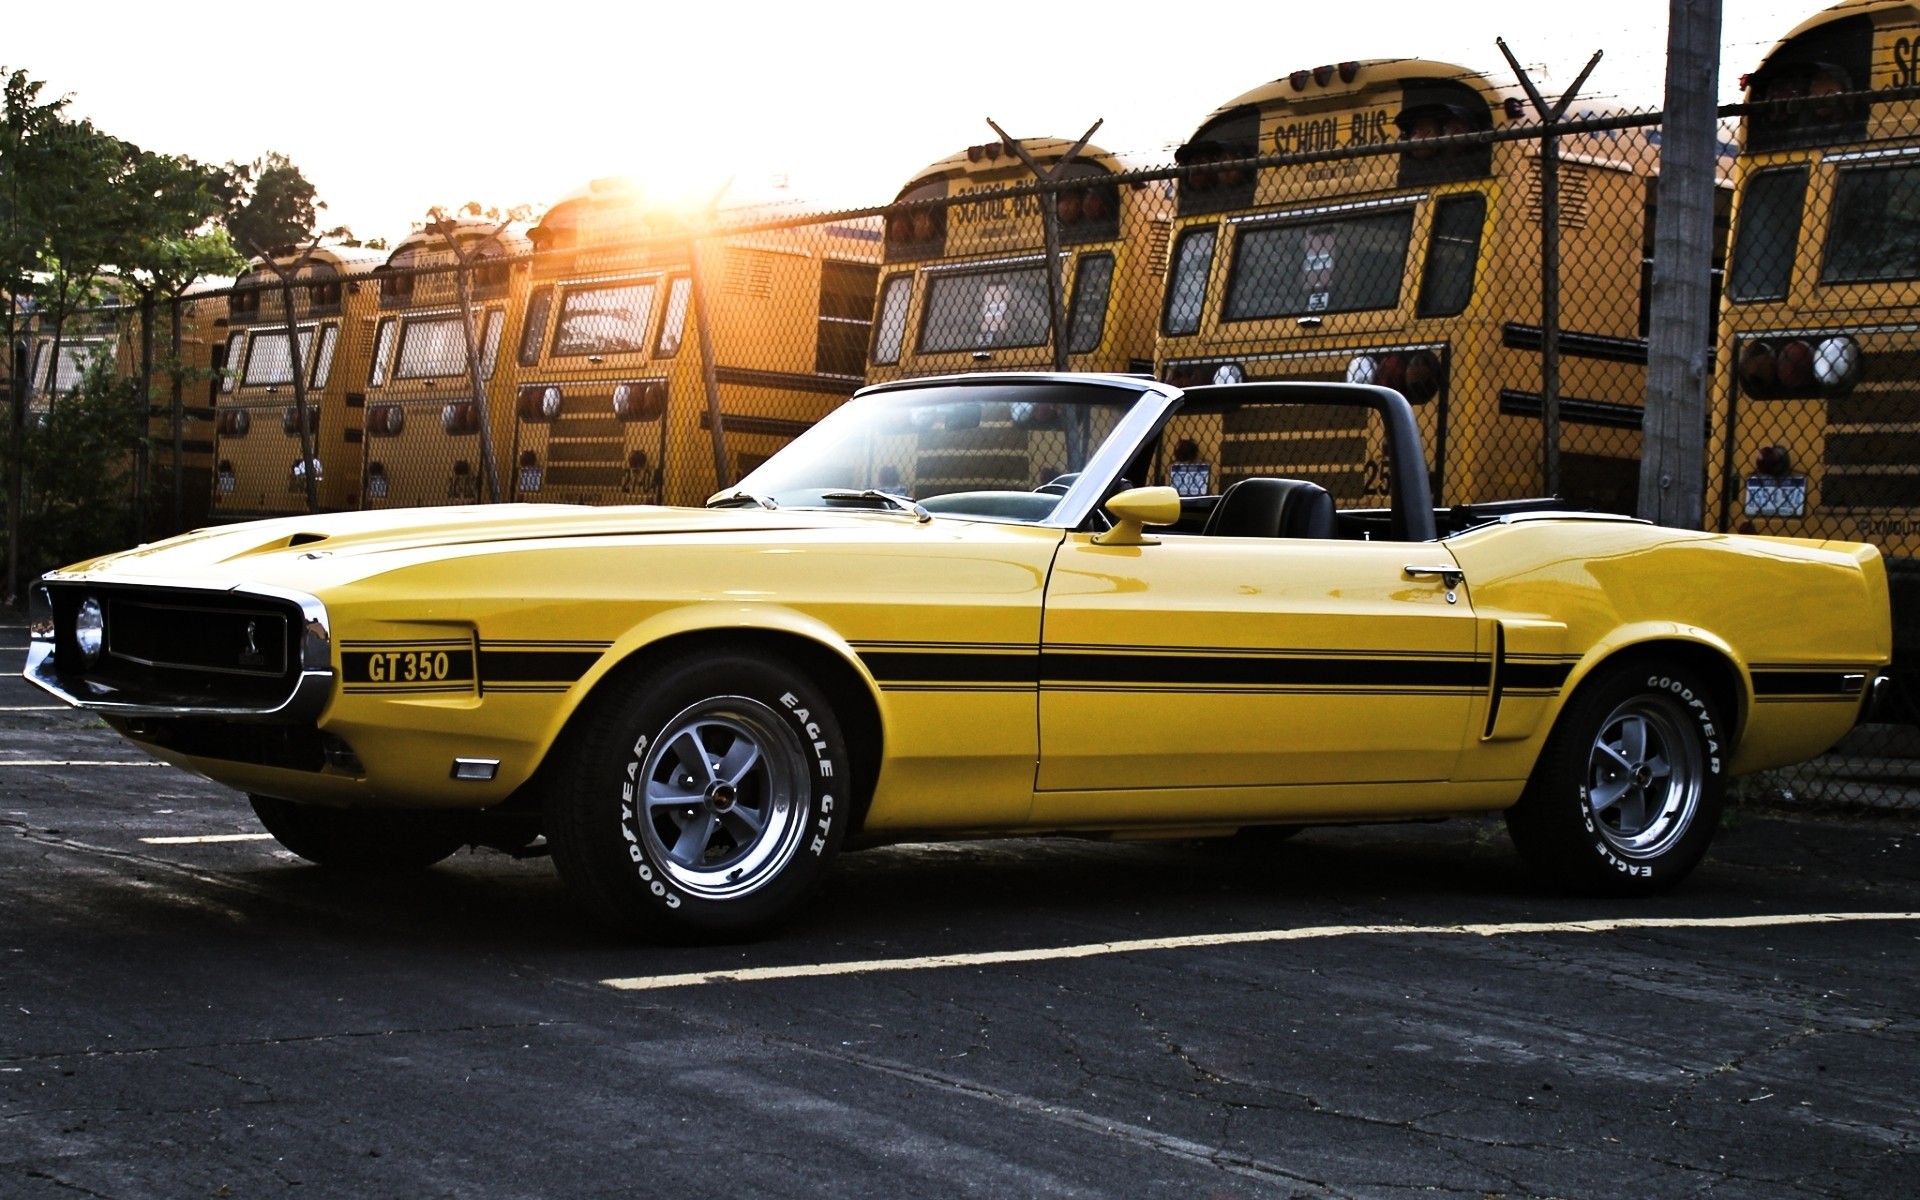 Wallpaper - Old Ford Mustang Yellow - HD Wallpaper 